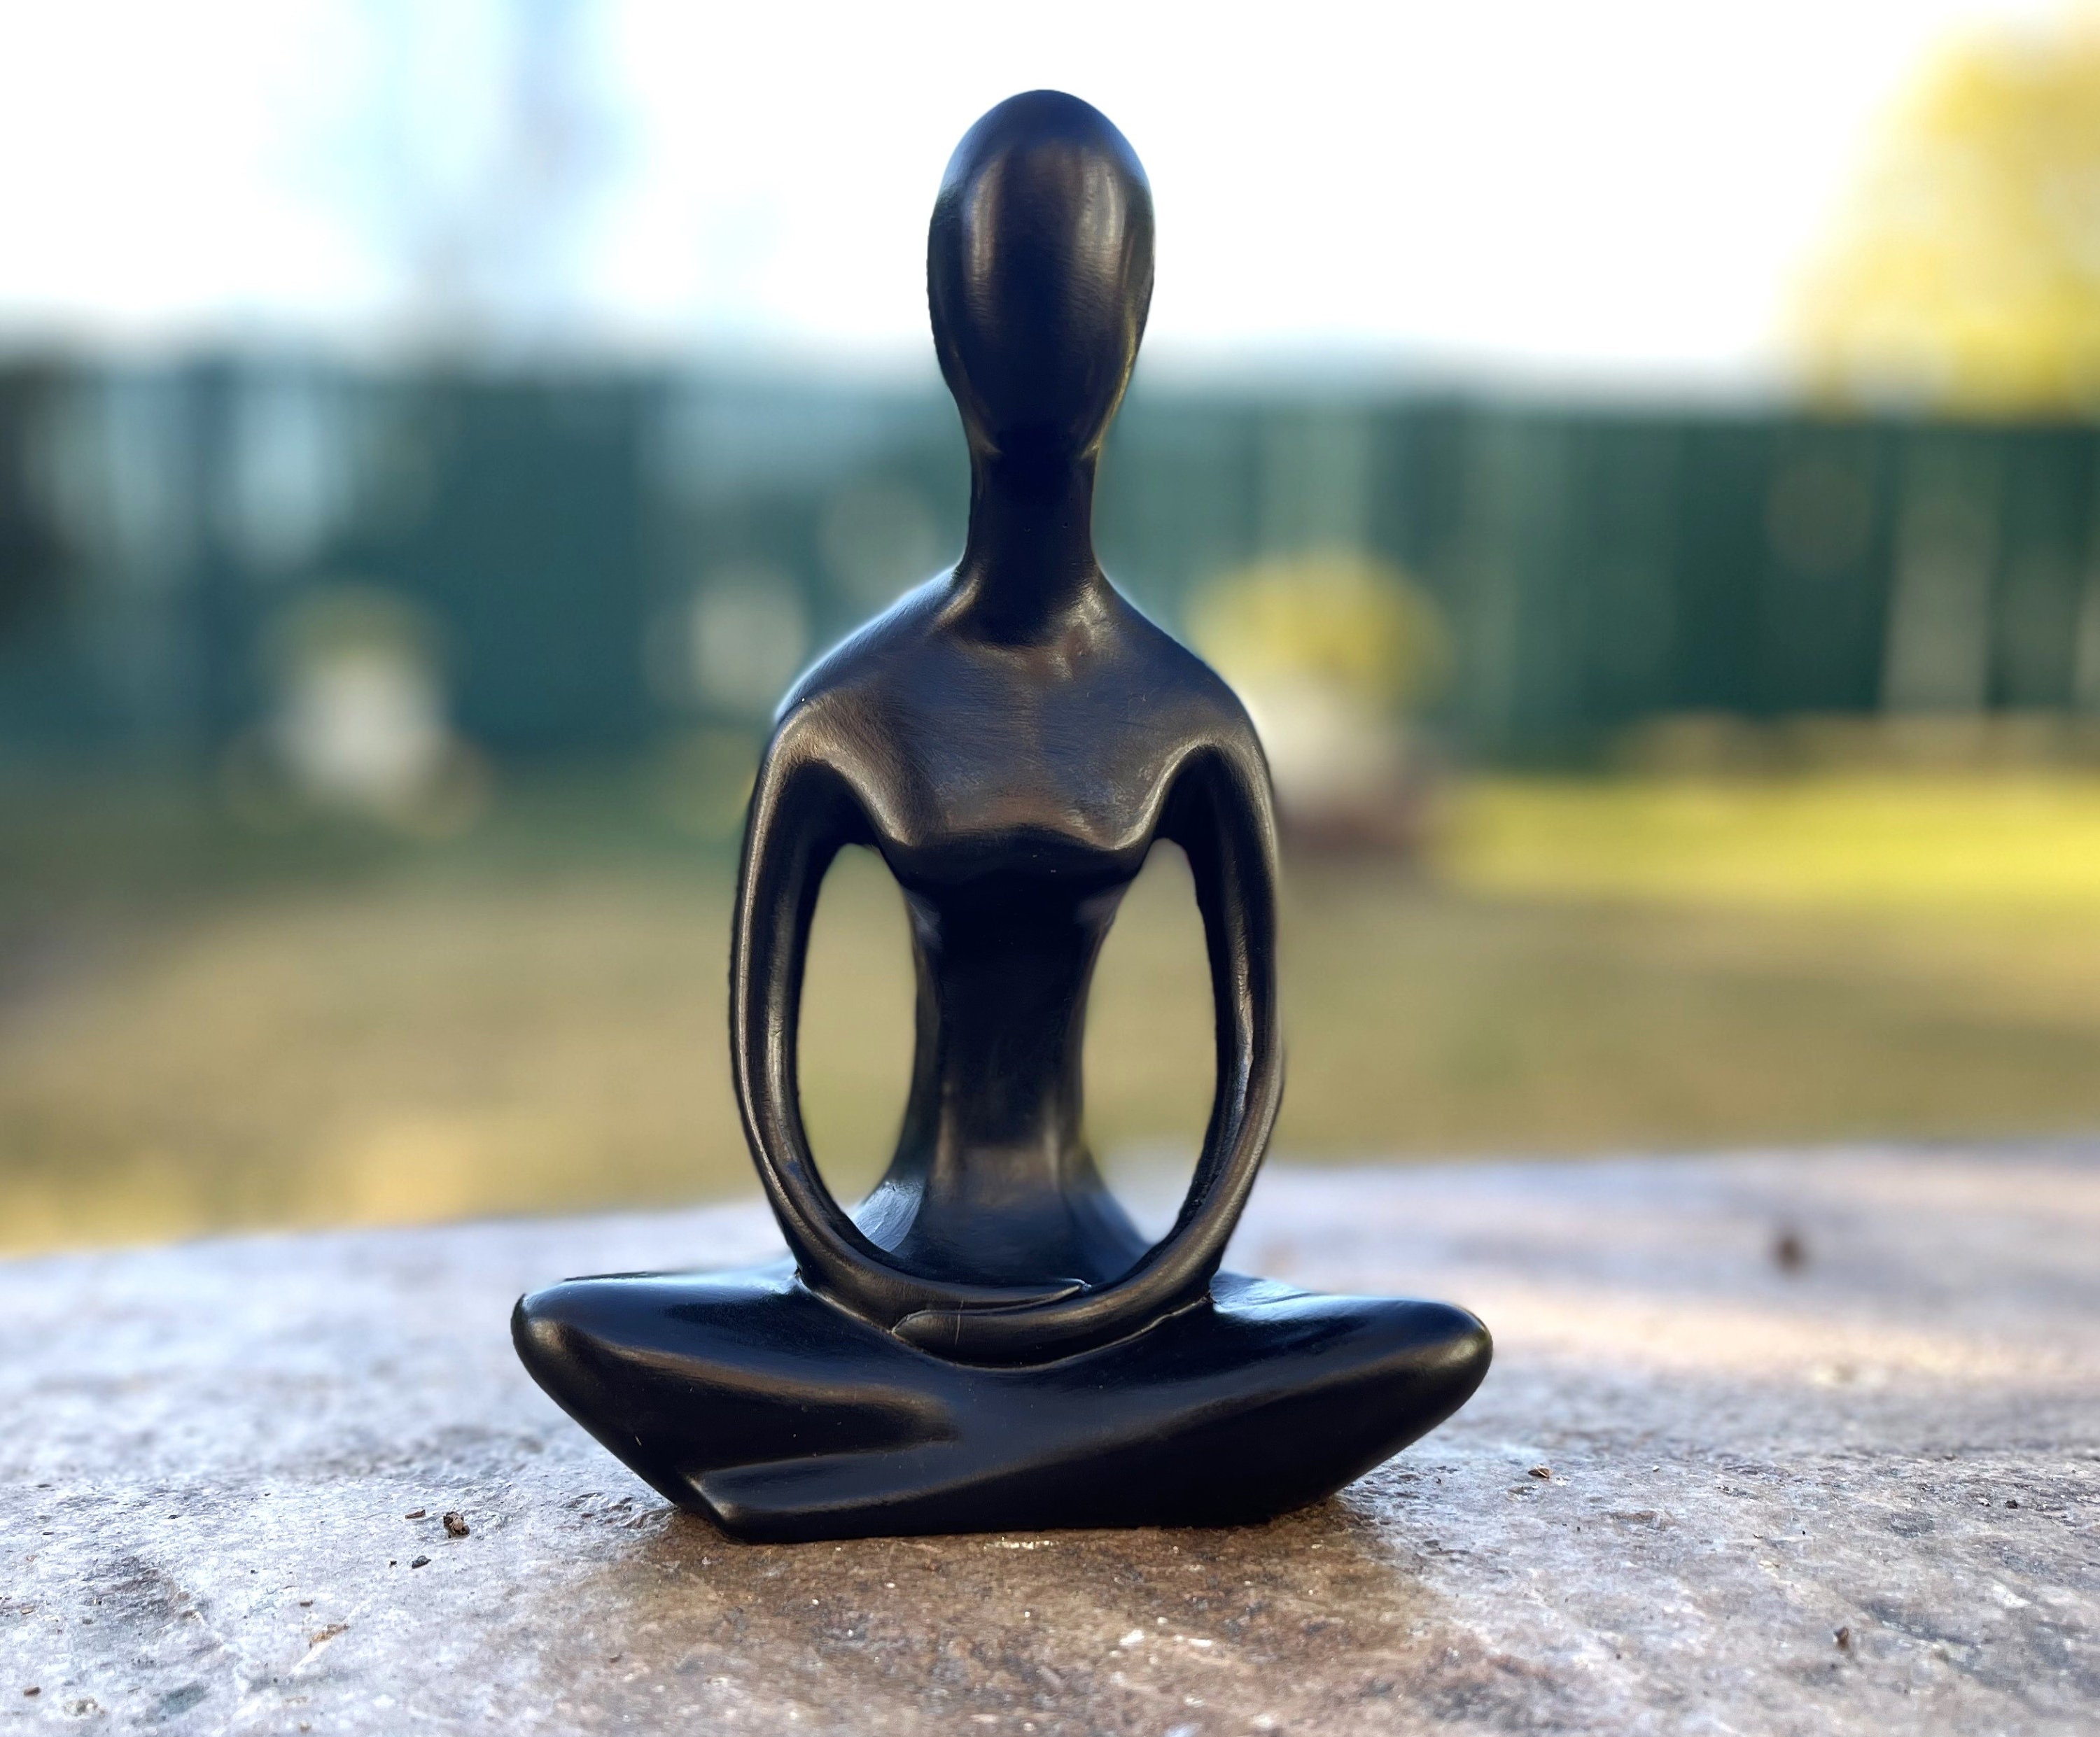 Yoga Art: Sculptures, Figurines, and Posters - HubPages